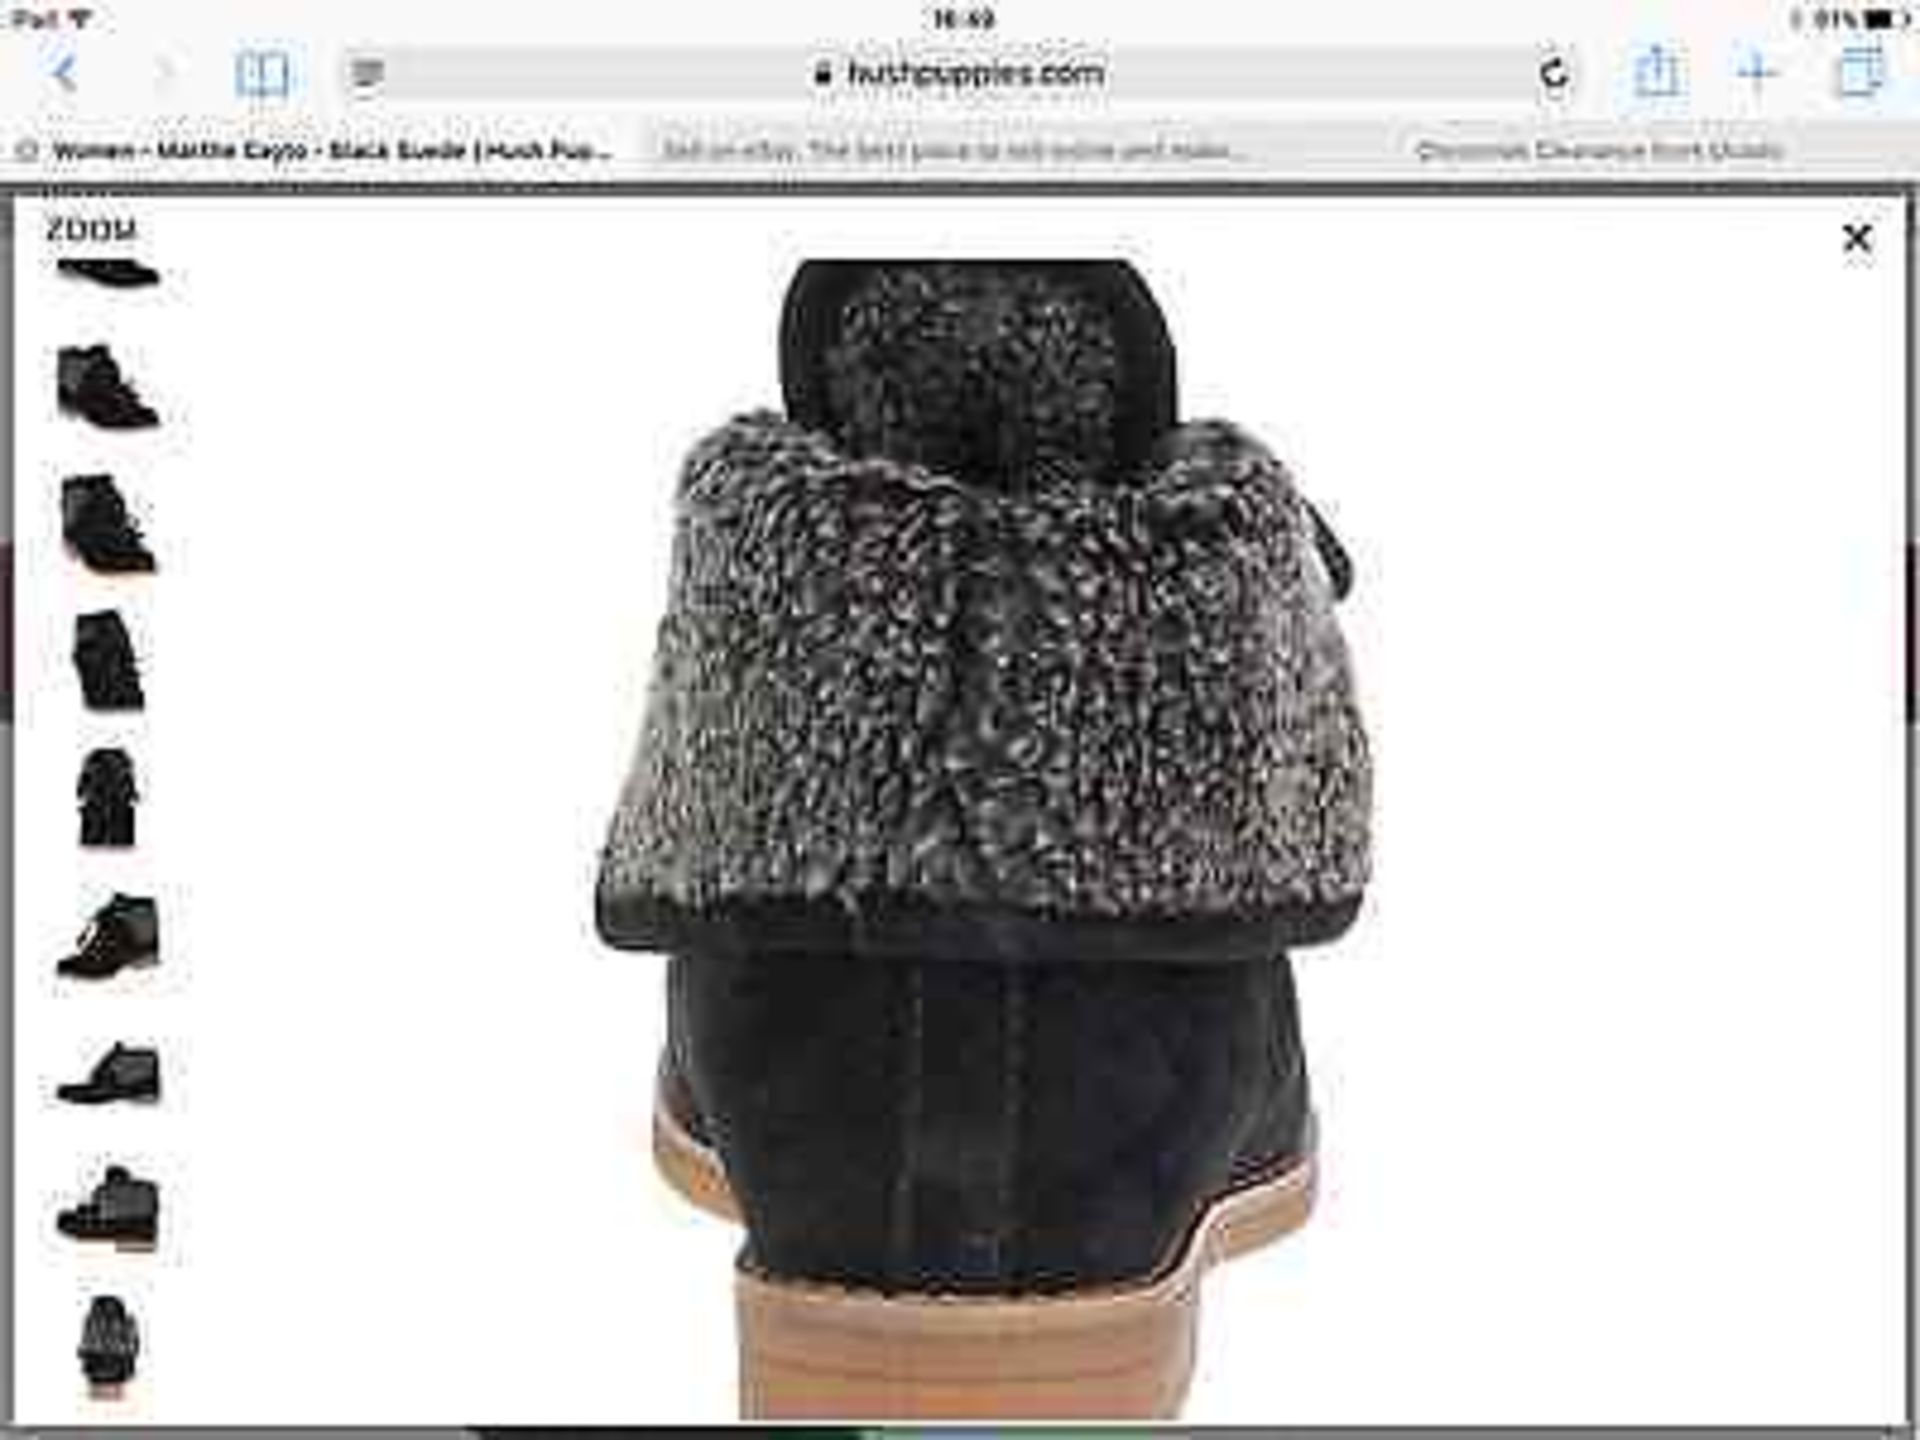 Hush Puppies Black Suede Martha Cayto Ankle Boot, Size UK 7, RRP £100 (New with box) - Image 10 of 12